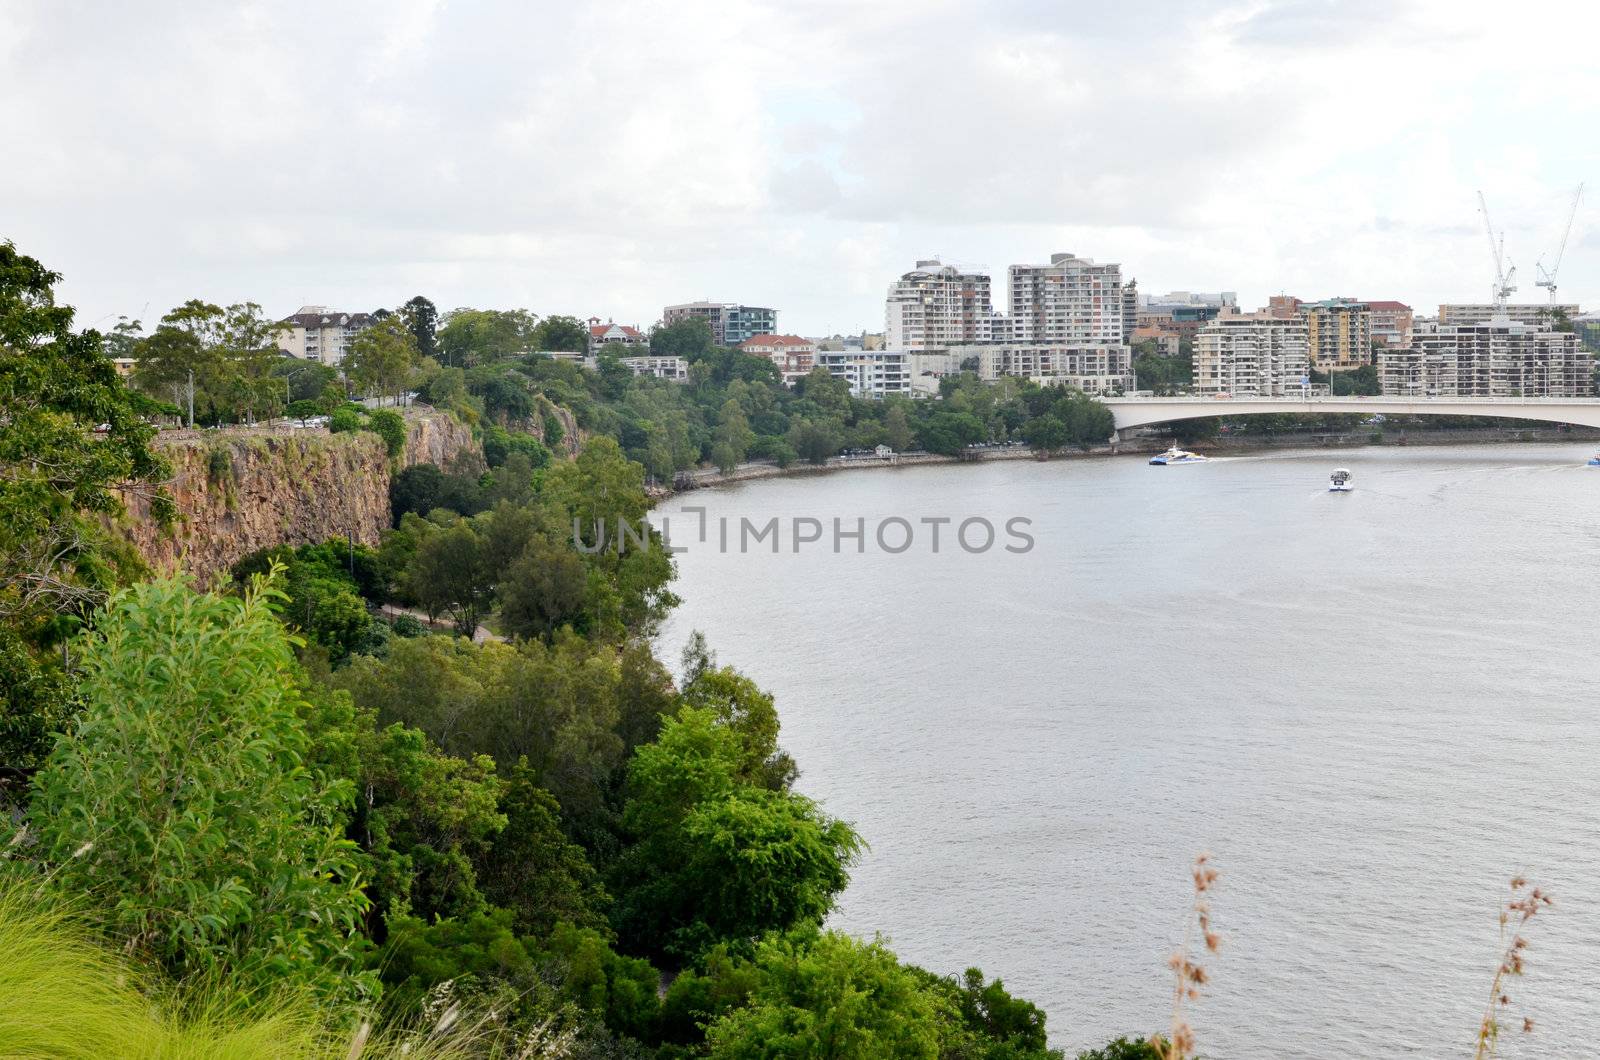 Kangaroo Point cliffs on the south bank of the Brisbane river. At the rear of the photo is the Captain Cook bridge.